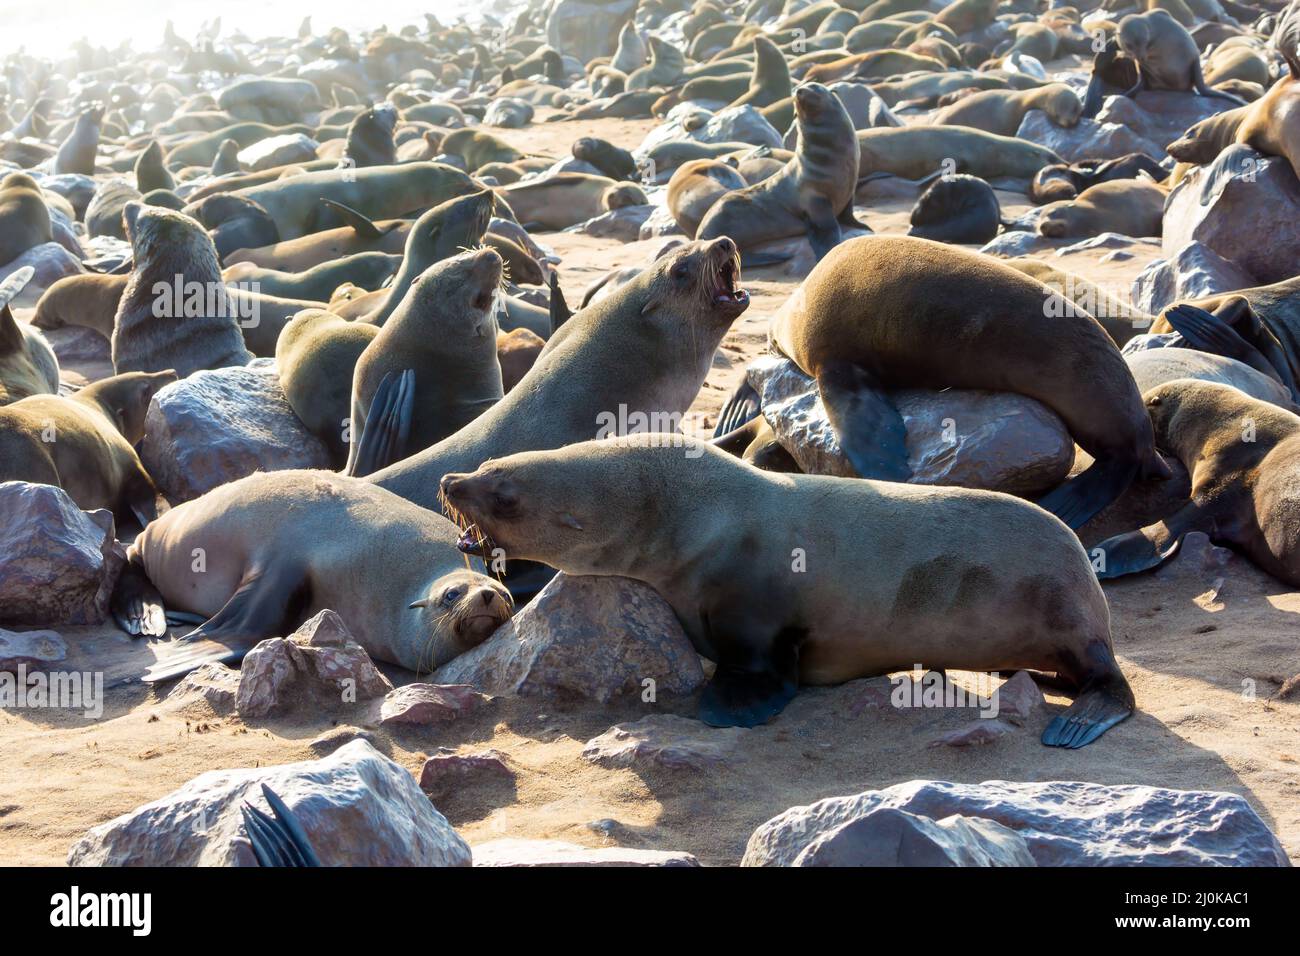 African fur seal rookery Stock Photo